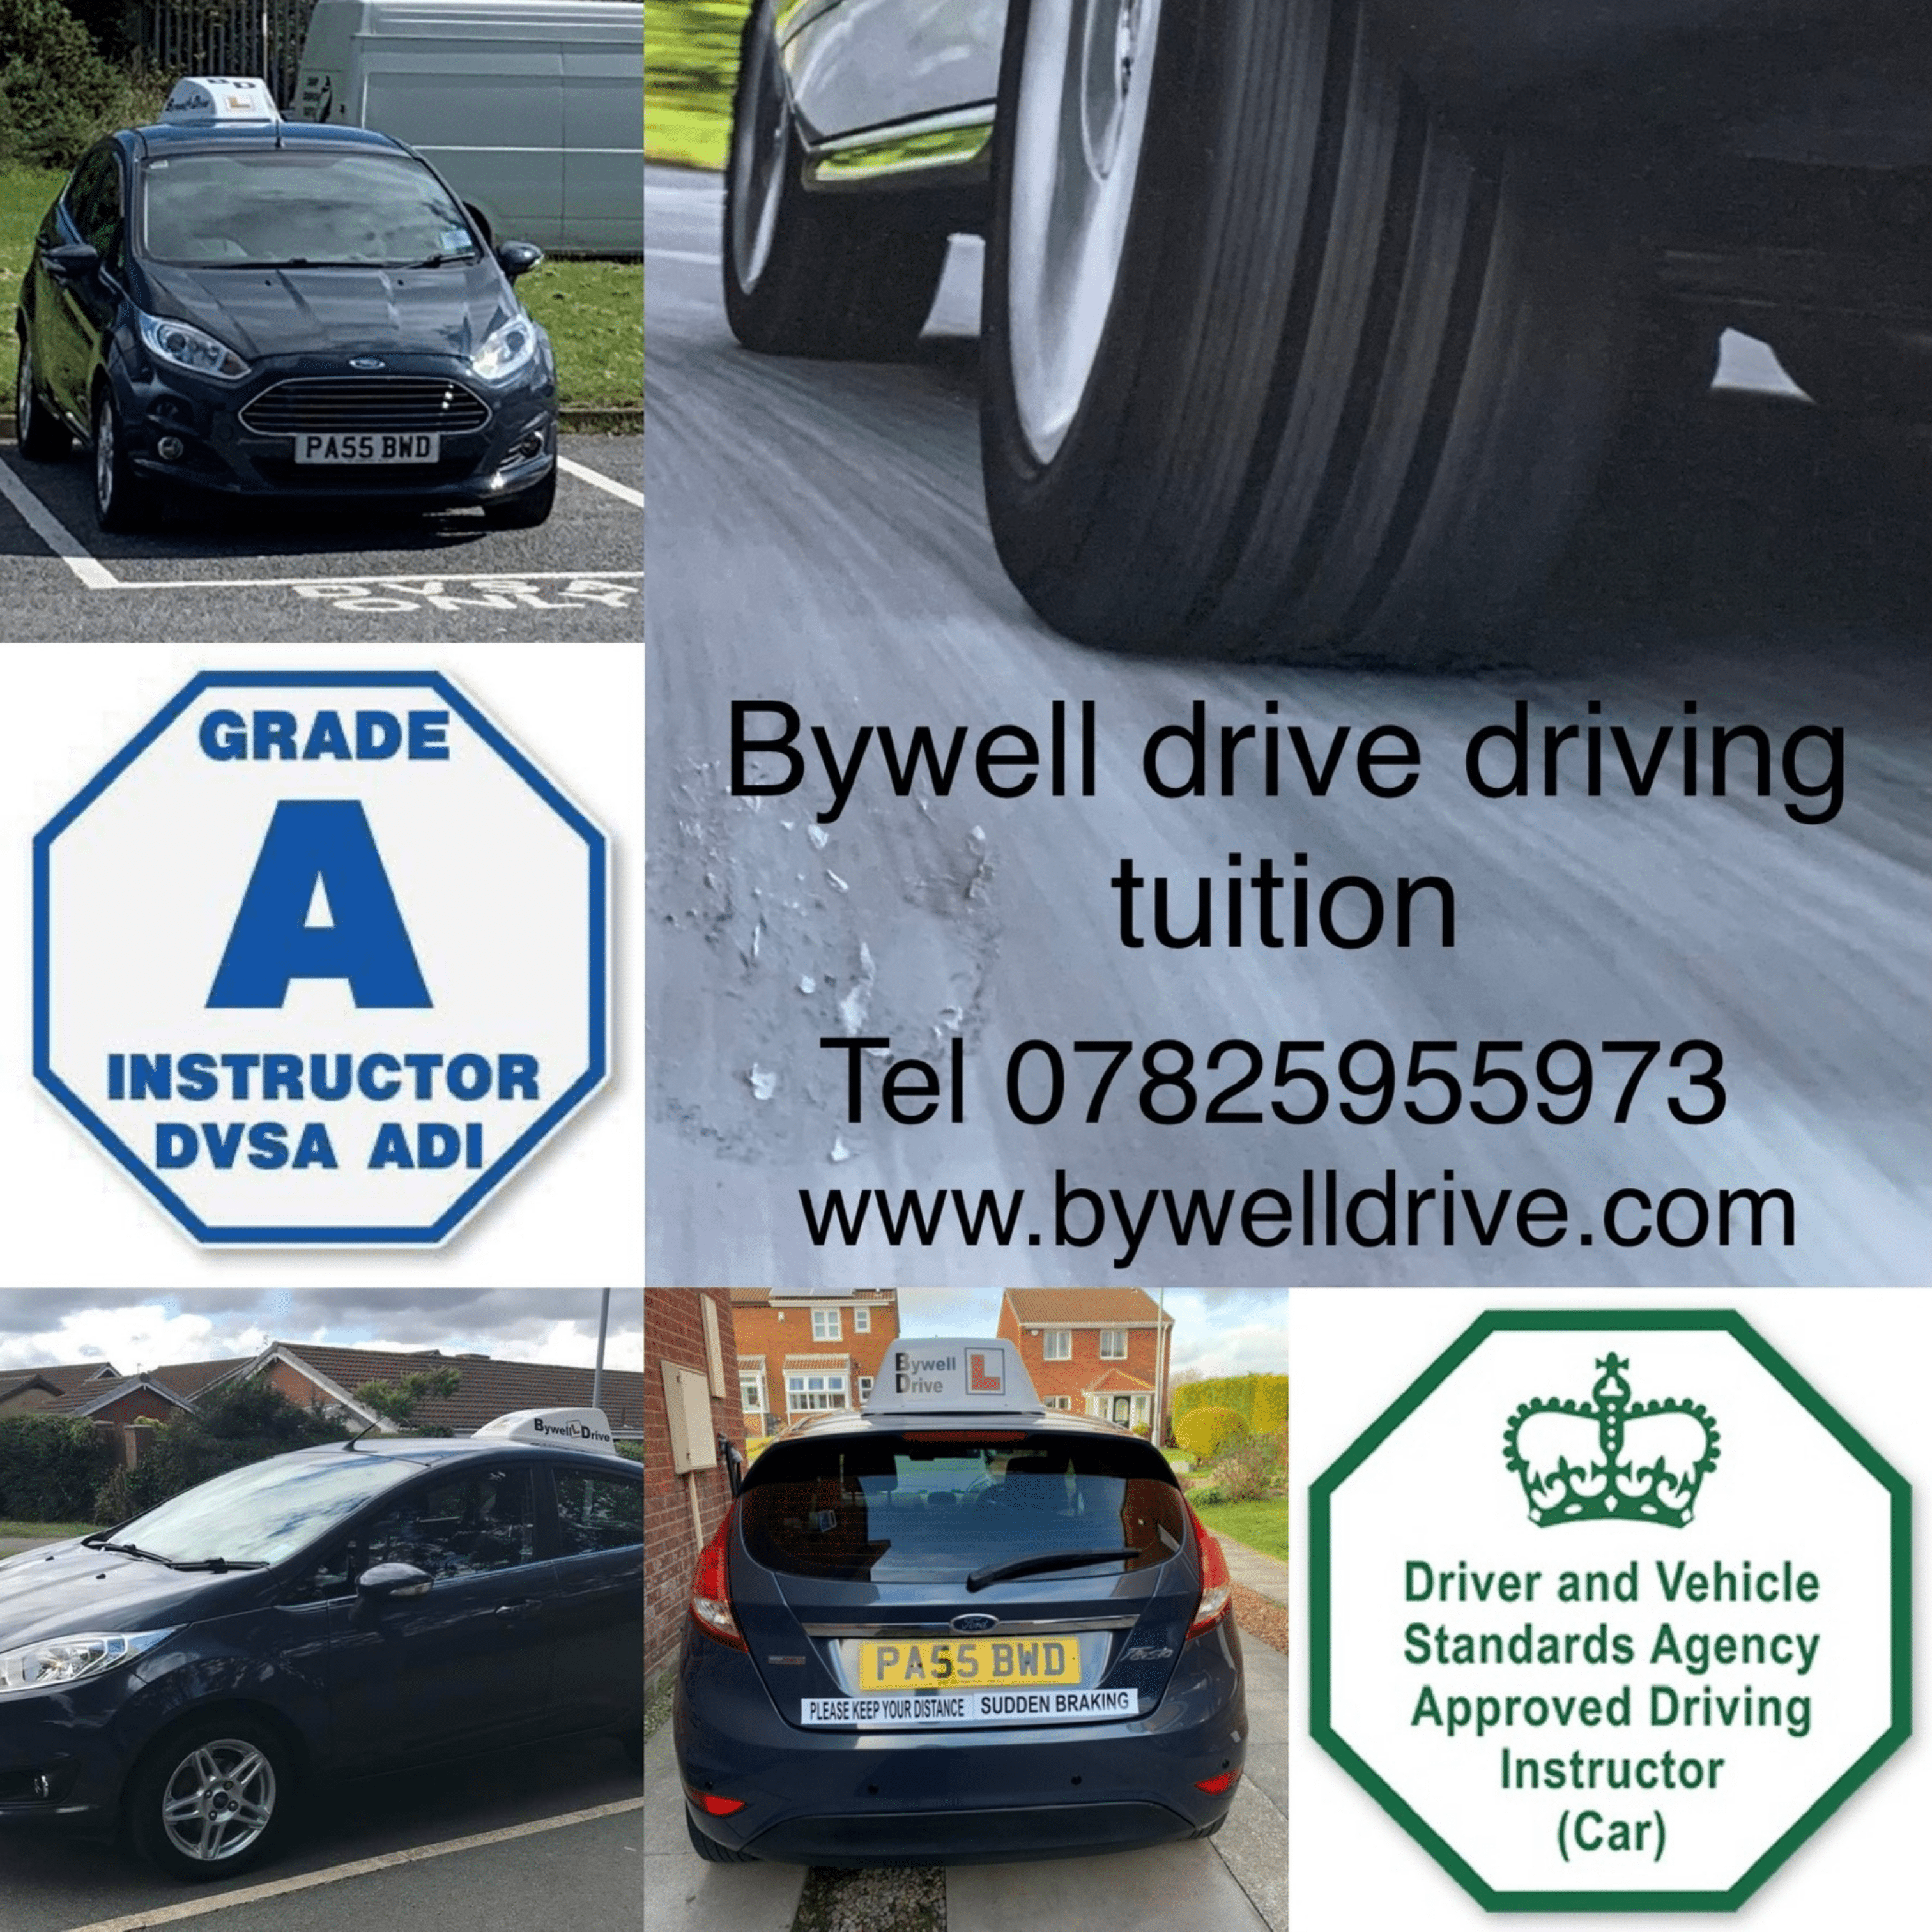 Bywell Drive Driving Tuition Driving lesson gift vouchers